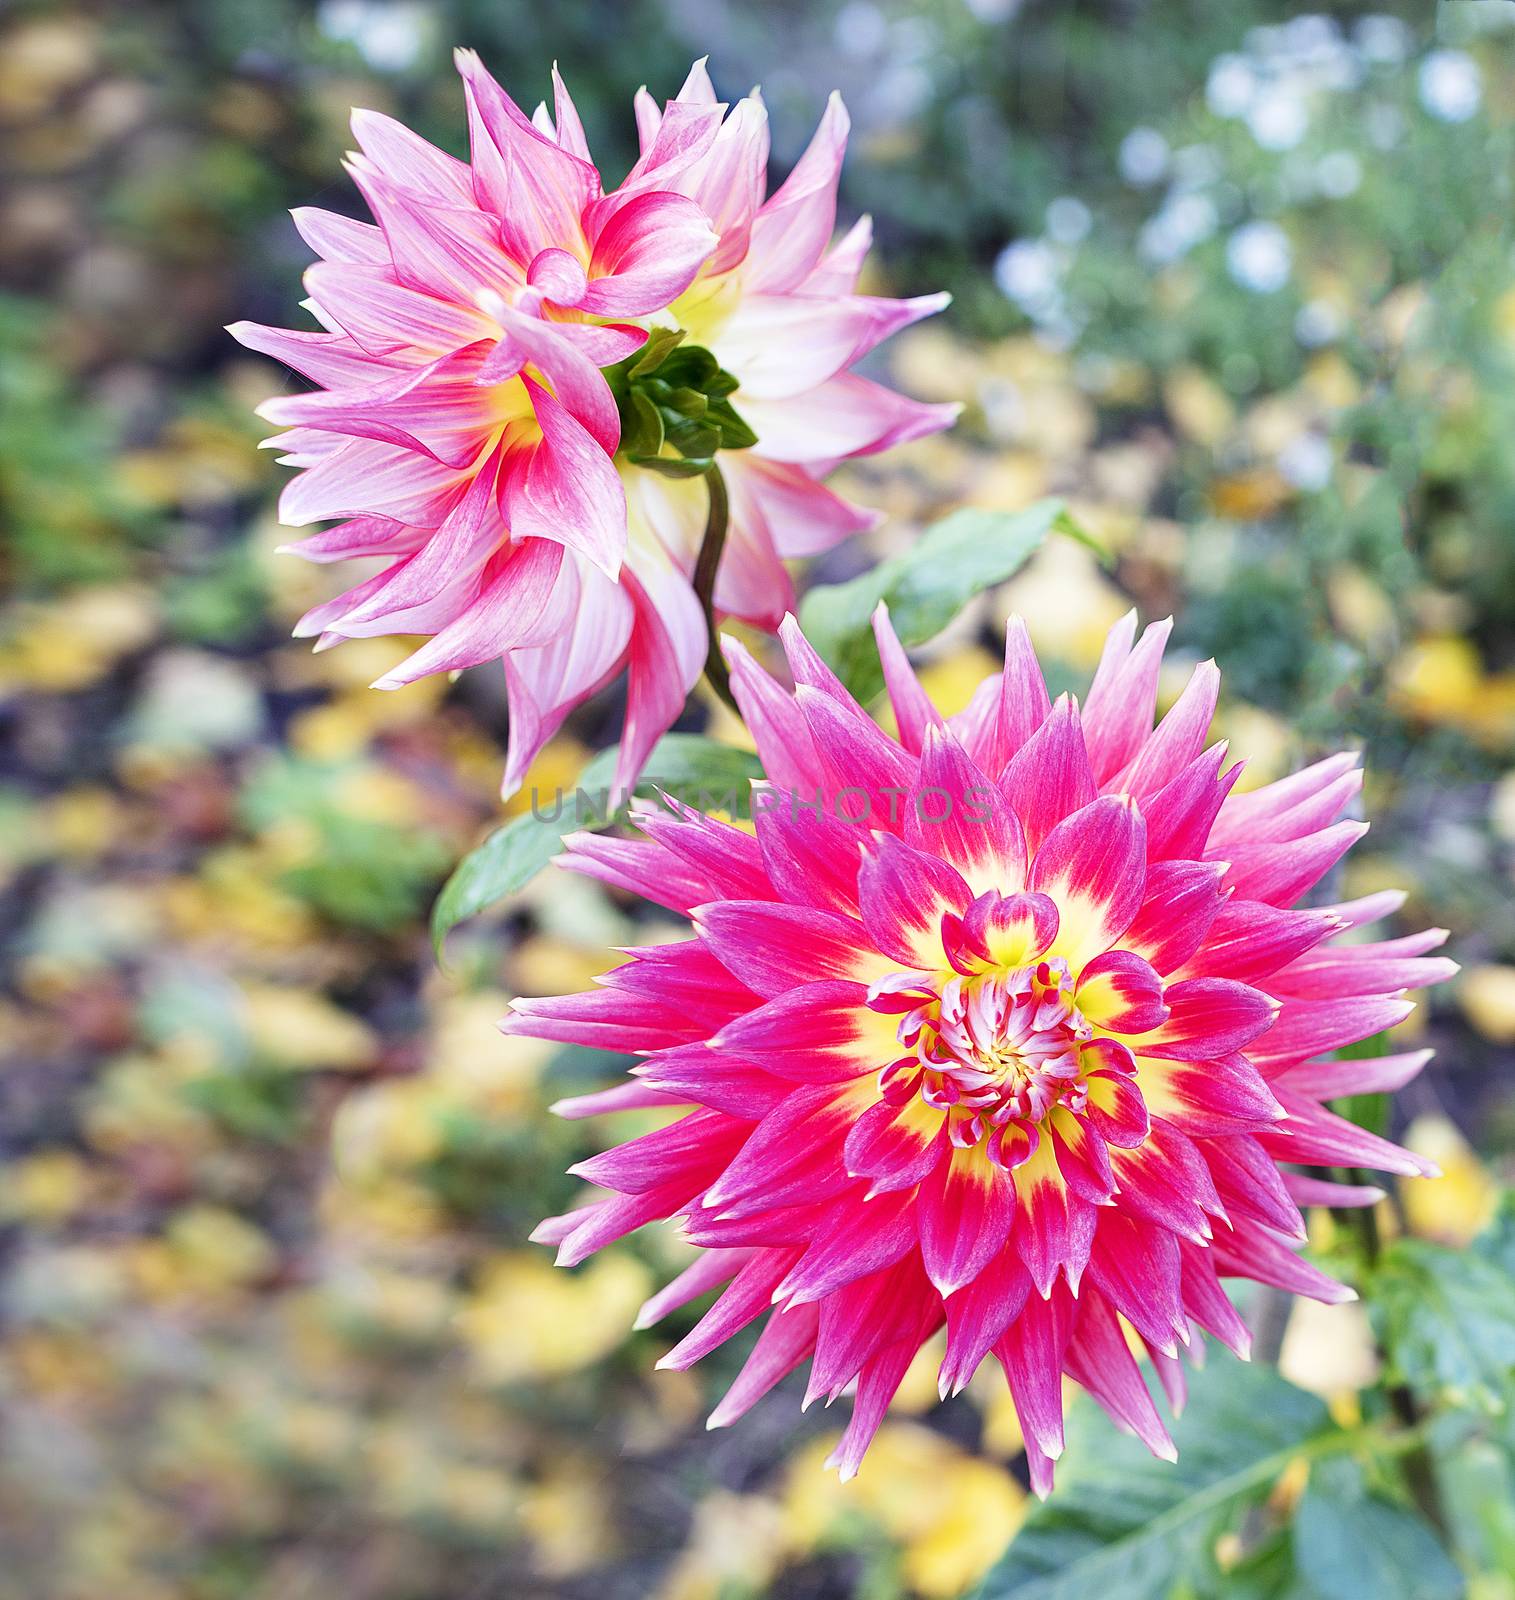 Beautiful bright red-pink blossoming flower Dahlia in autumn garden close-up